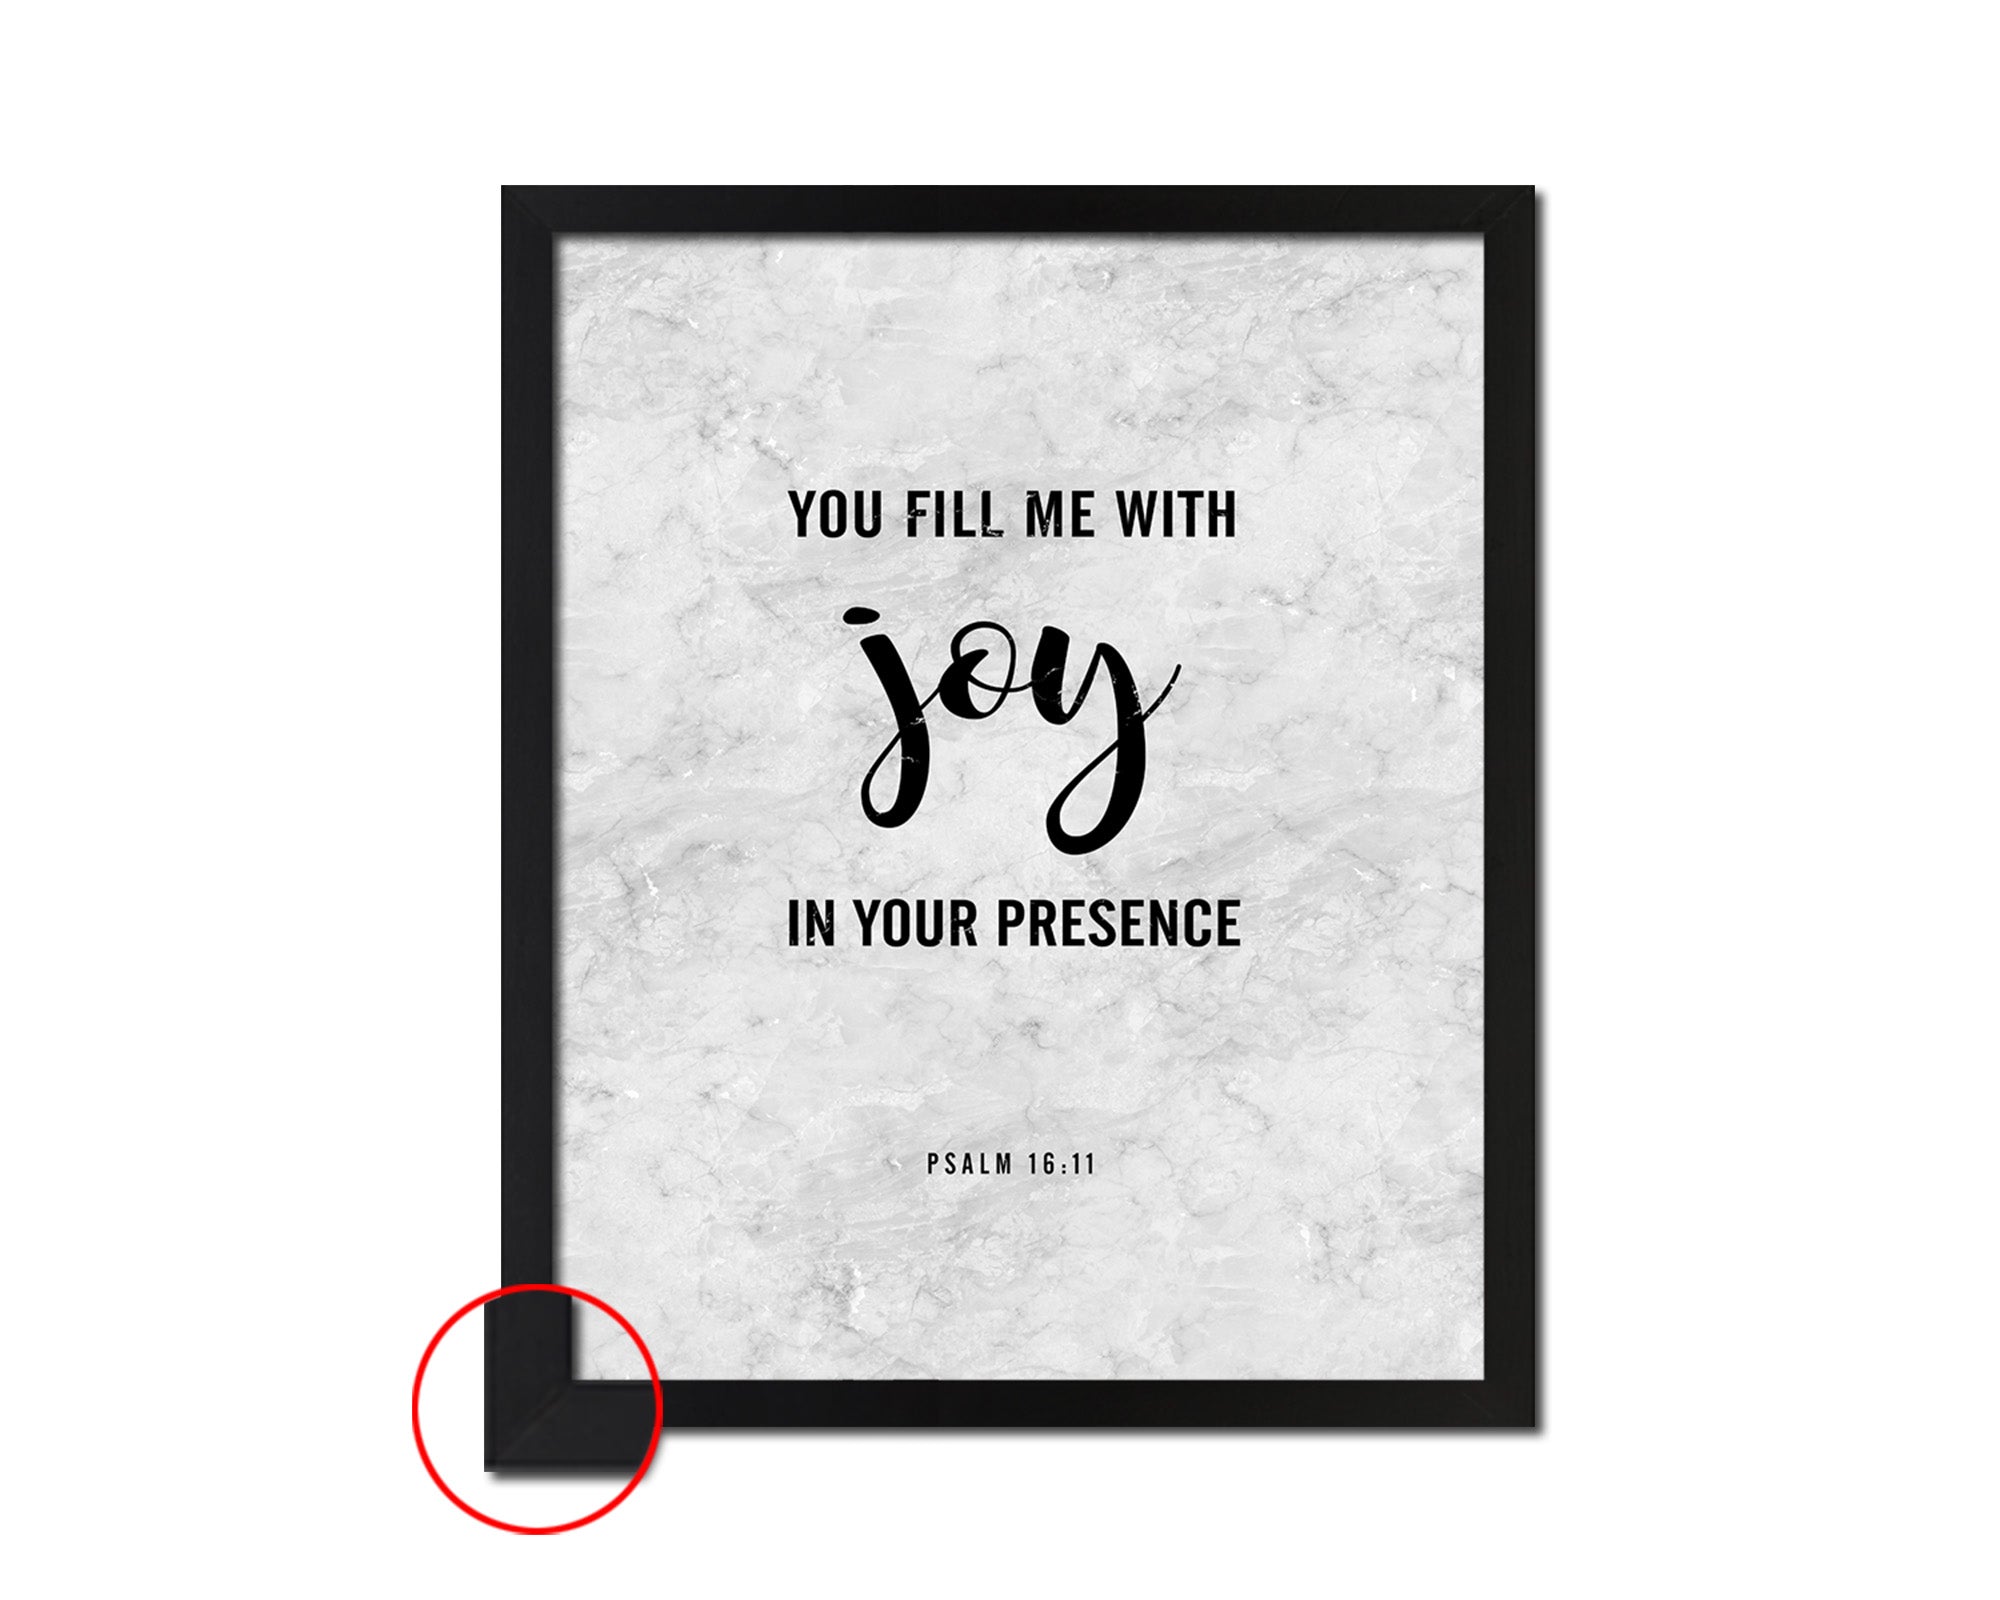 You fill me with joy in your presence, Psalm 16:11 Bible Scripture Verse Framed Art